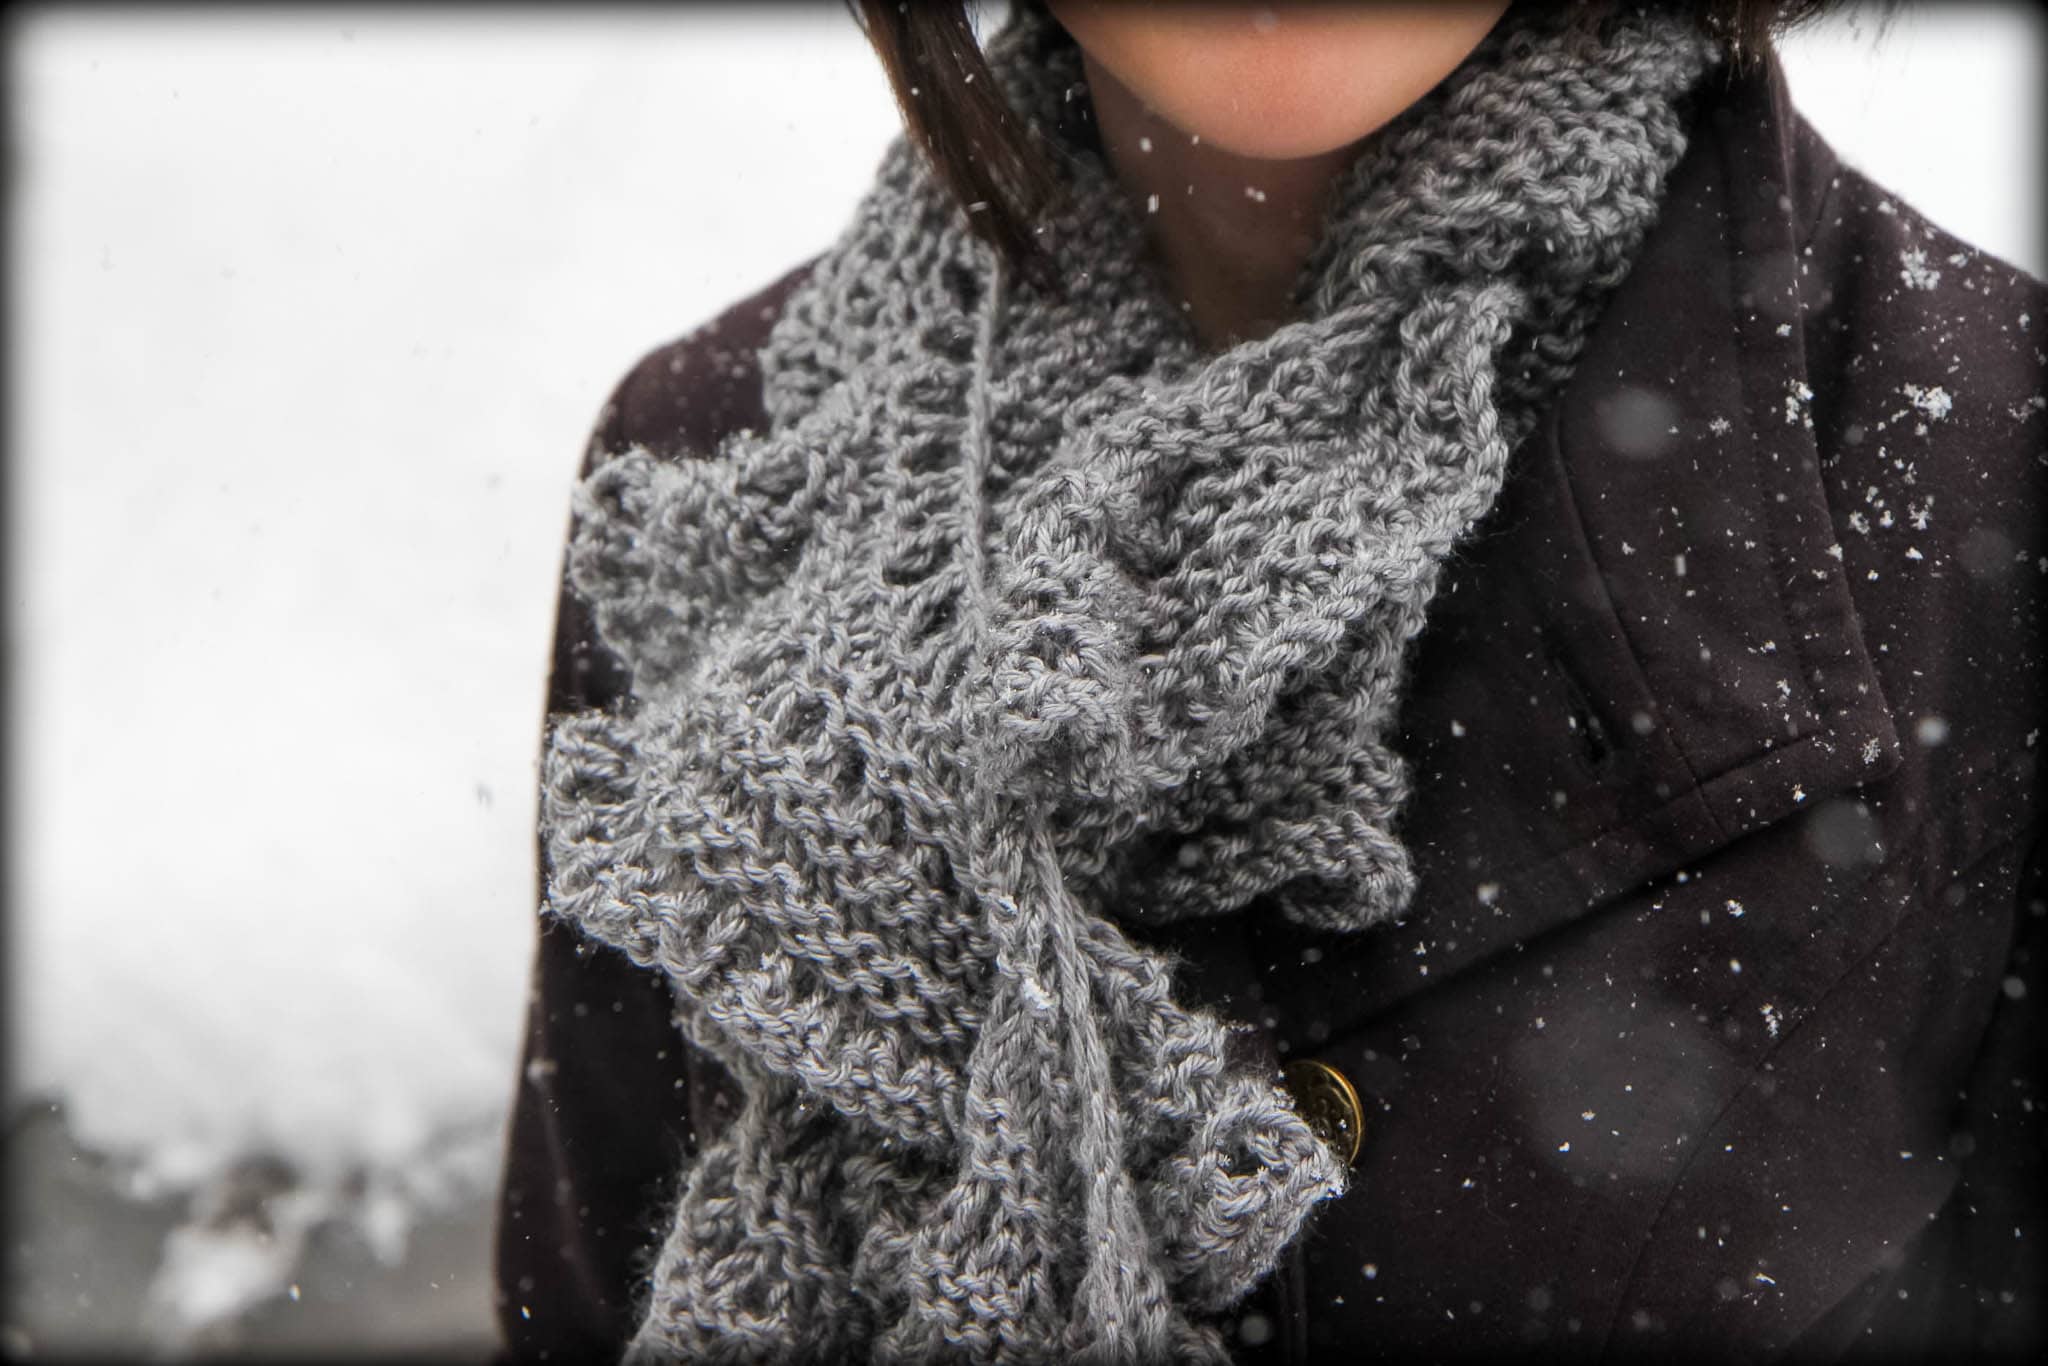 How to Knit a Ruffled Lace Scarf from MomAdvice.com